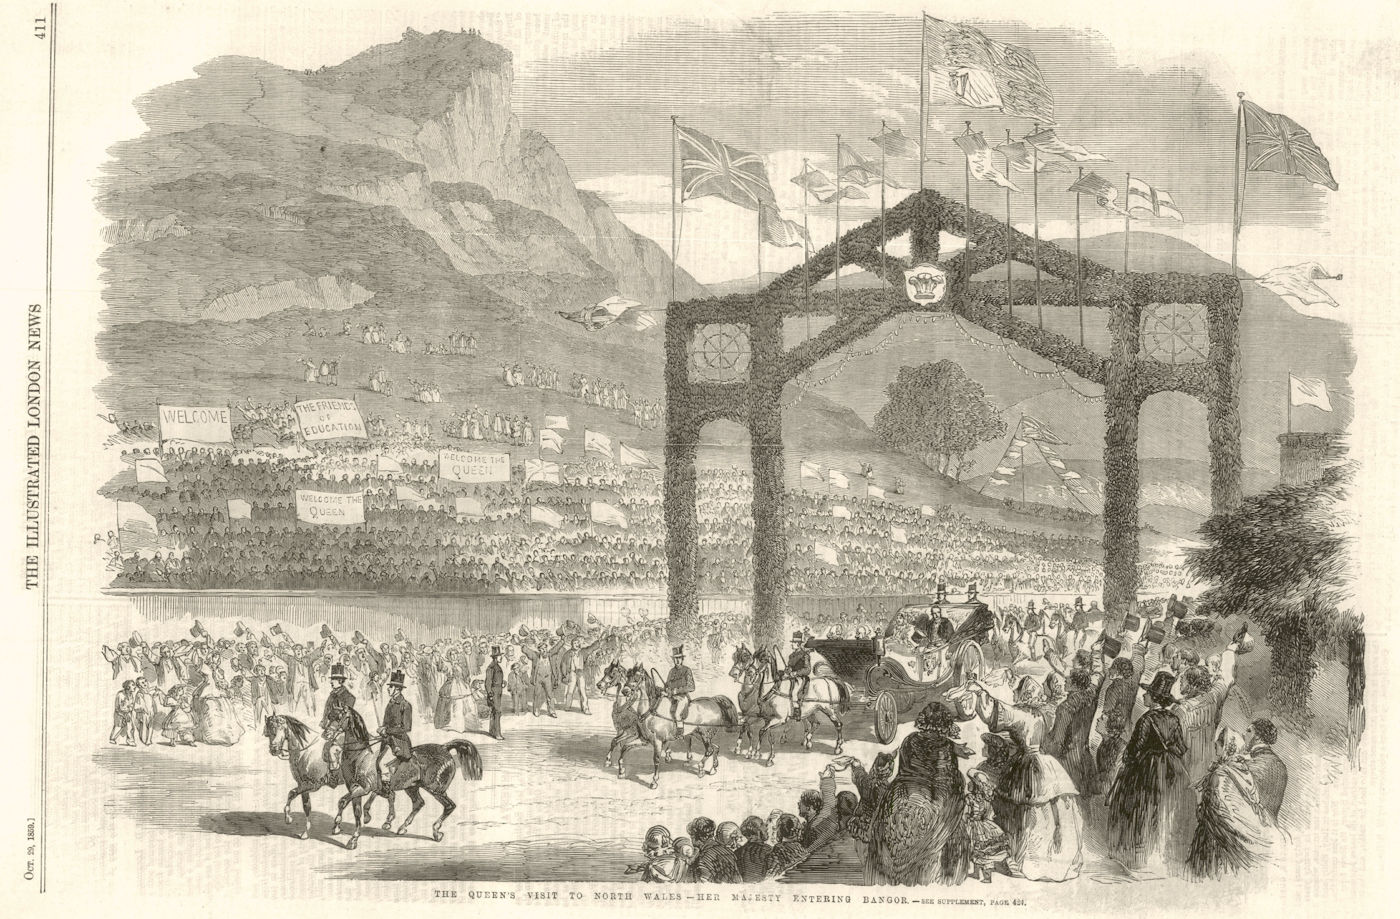 Associate Product Queen Victoria's Visit to North Wales - Her Majesty entering Bangor 1859 print